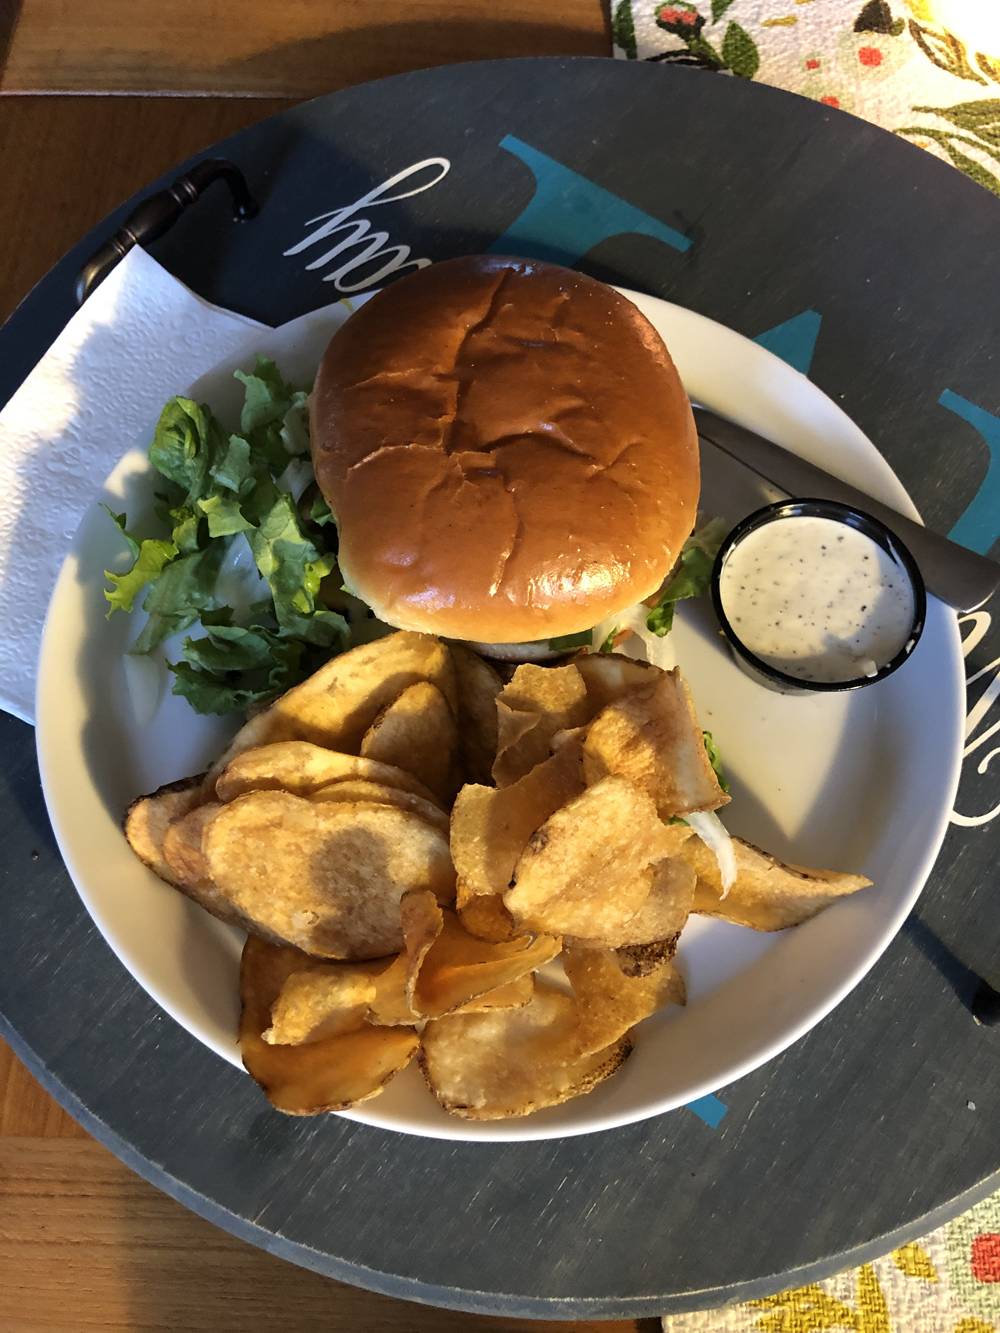 A large sandwich with shredded lettuce coming out of the sides is on a plate with potato chips and a small container of a white dipping sauce. Photo by Carly McCrory-McKay. 